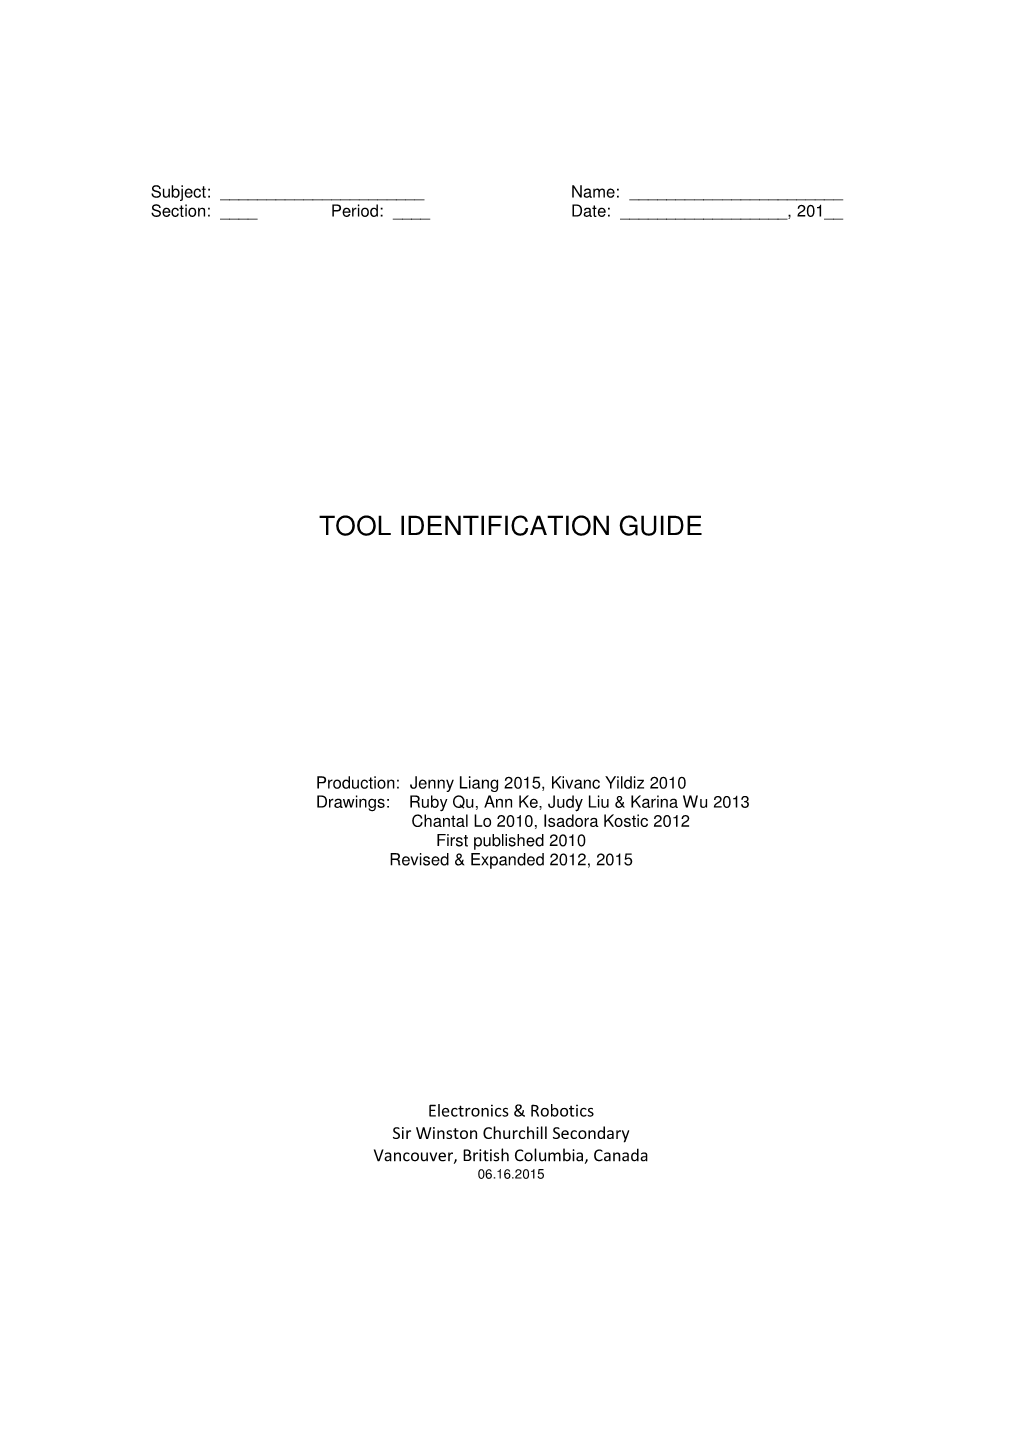 Tool Identification Guide